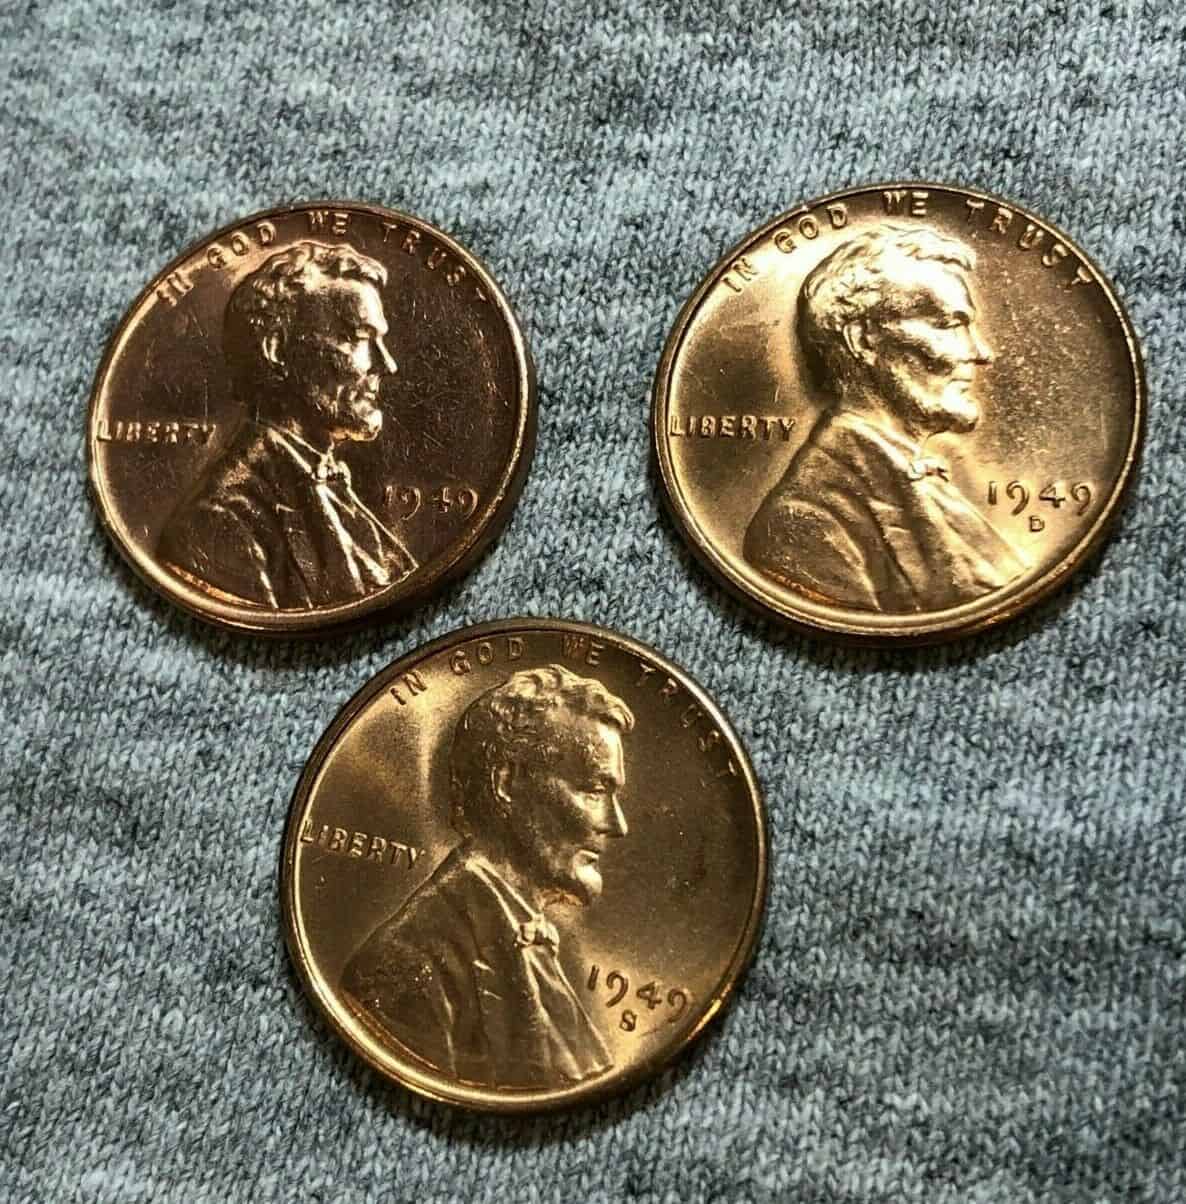 Factors that Affect the Price of the 1949 Lincoln Wheat Penny